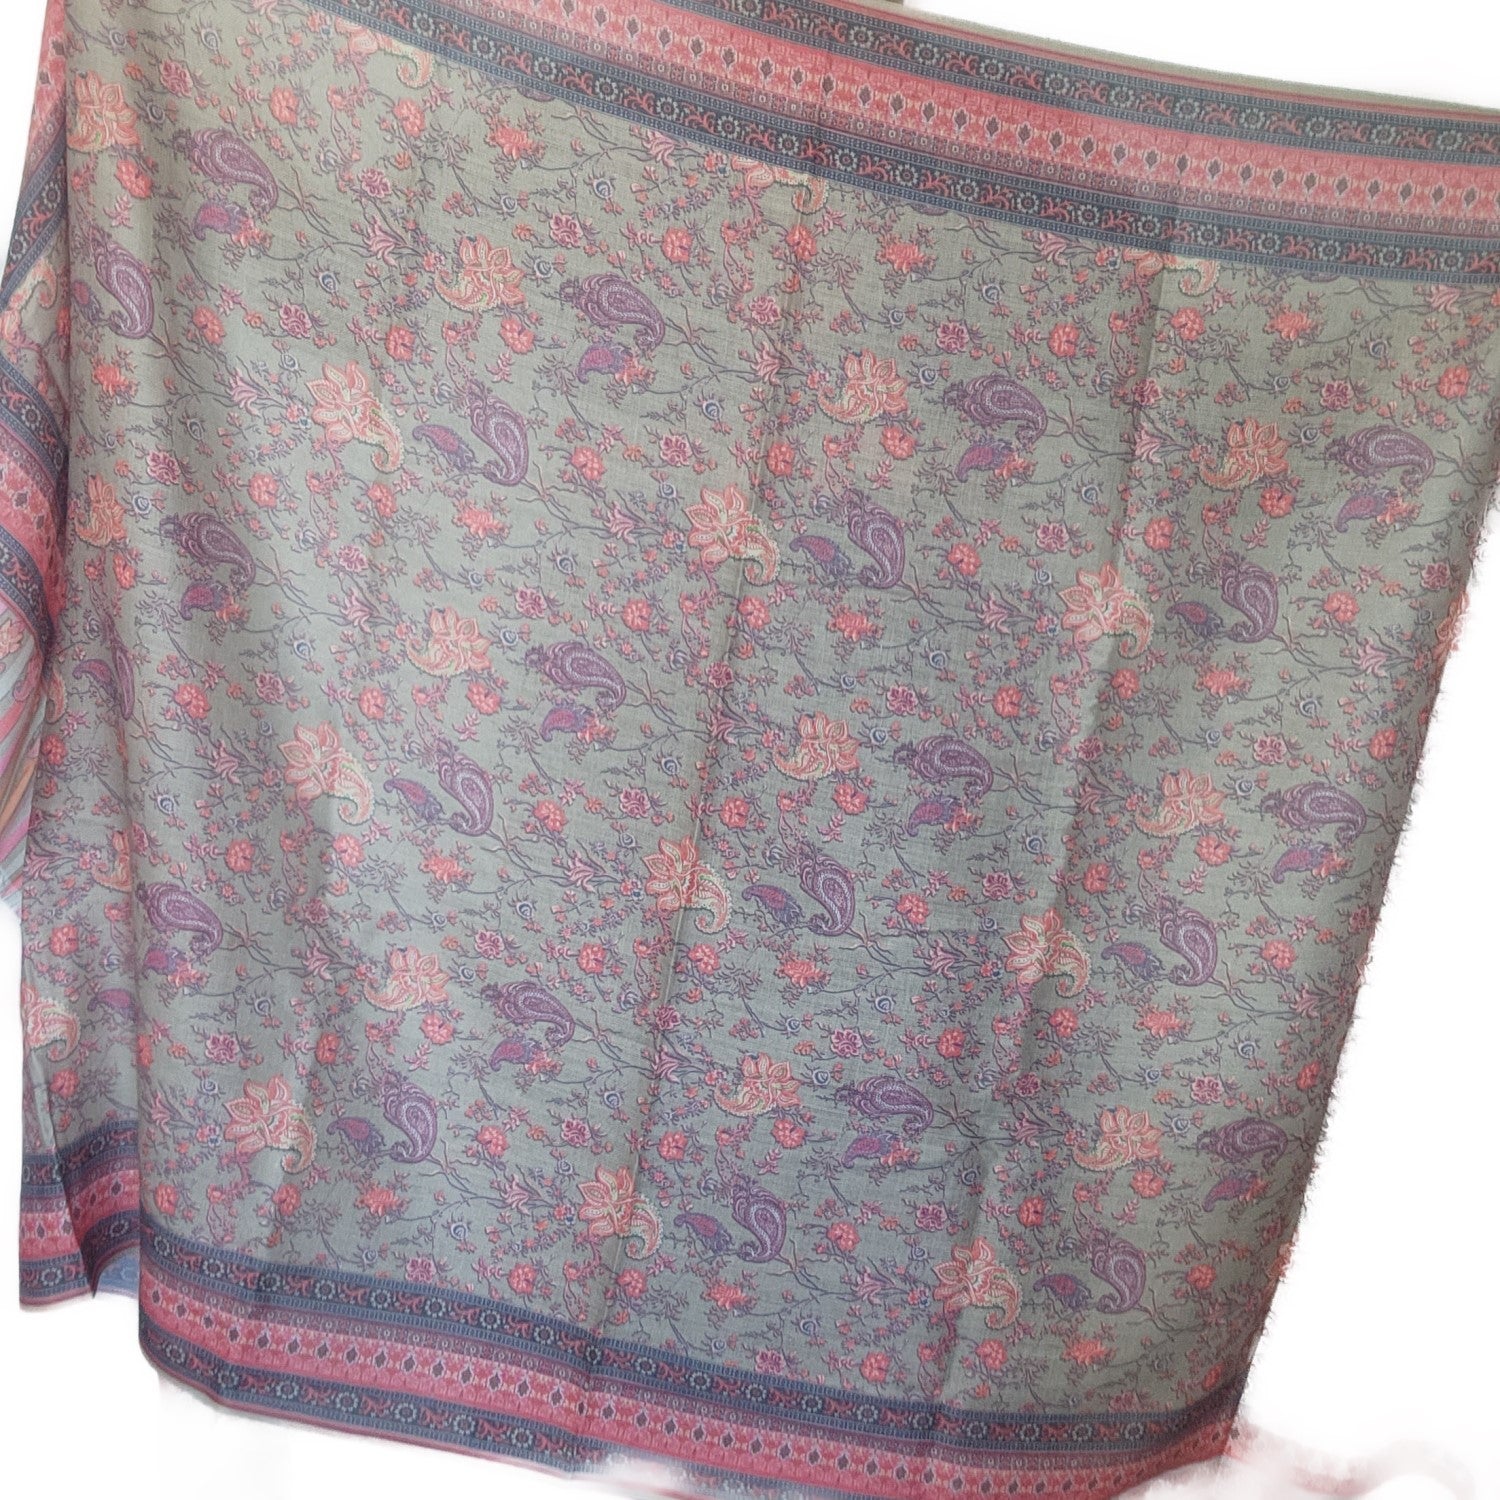 pure-wool-shawl-brown-red-floral-design-with-lines-on-border